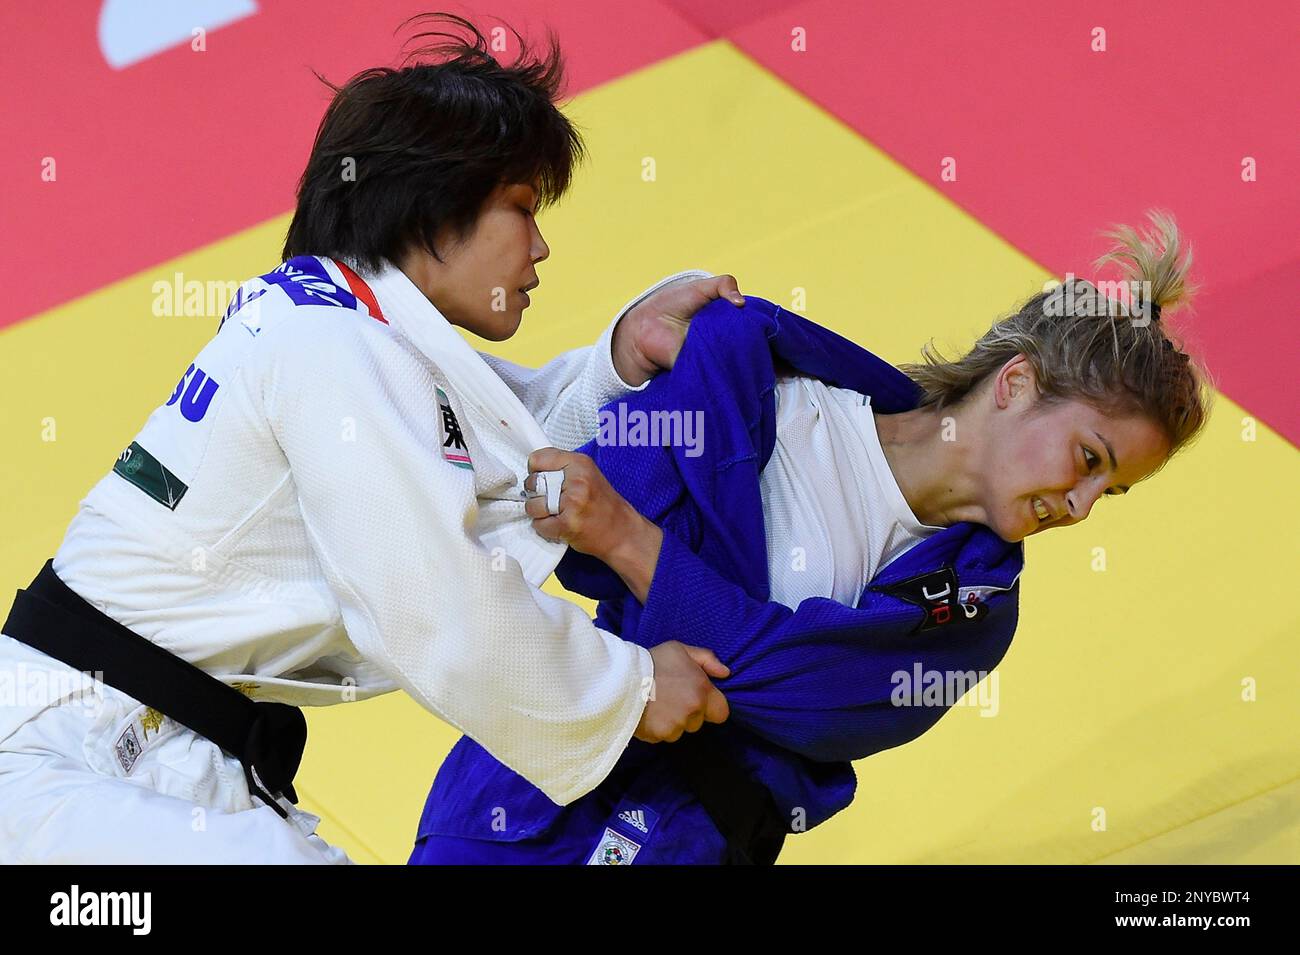 Katinka Szabo, in blue, of Hungary and Ai Shishime of Japan fight in the womens 52kg category of the Judo World Championships in Papp Laszlo Budapest Sports Arena in Budapest, Hungary, Tuesday,